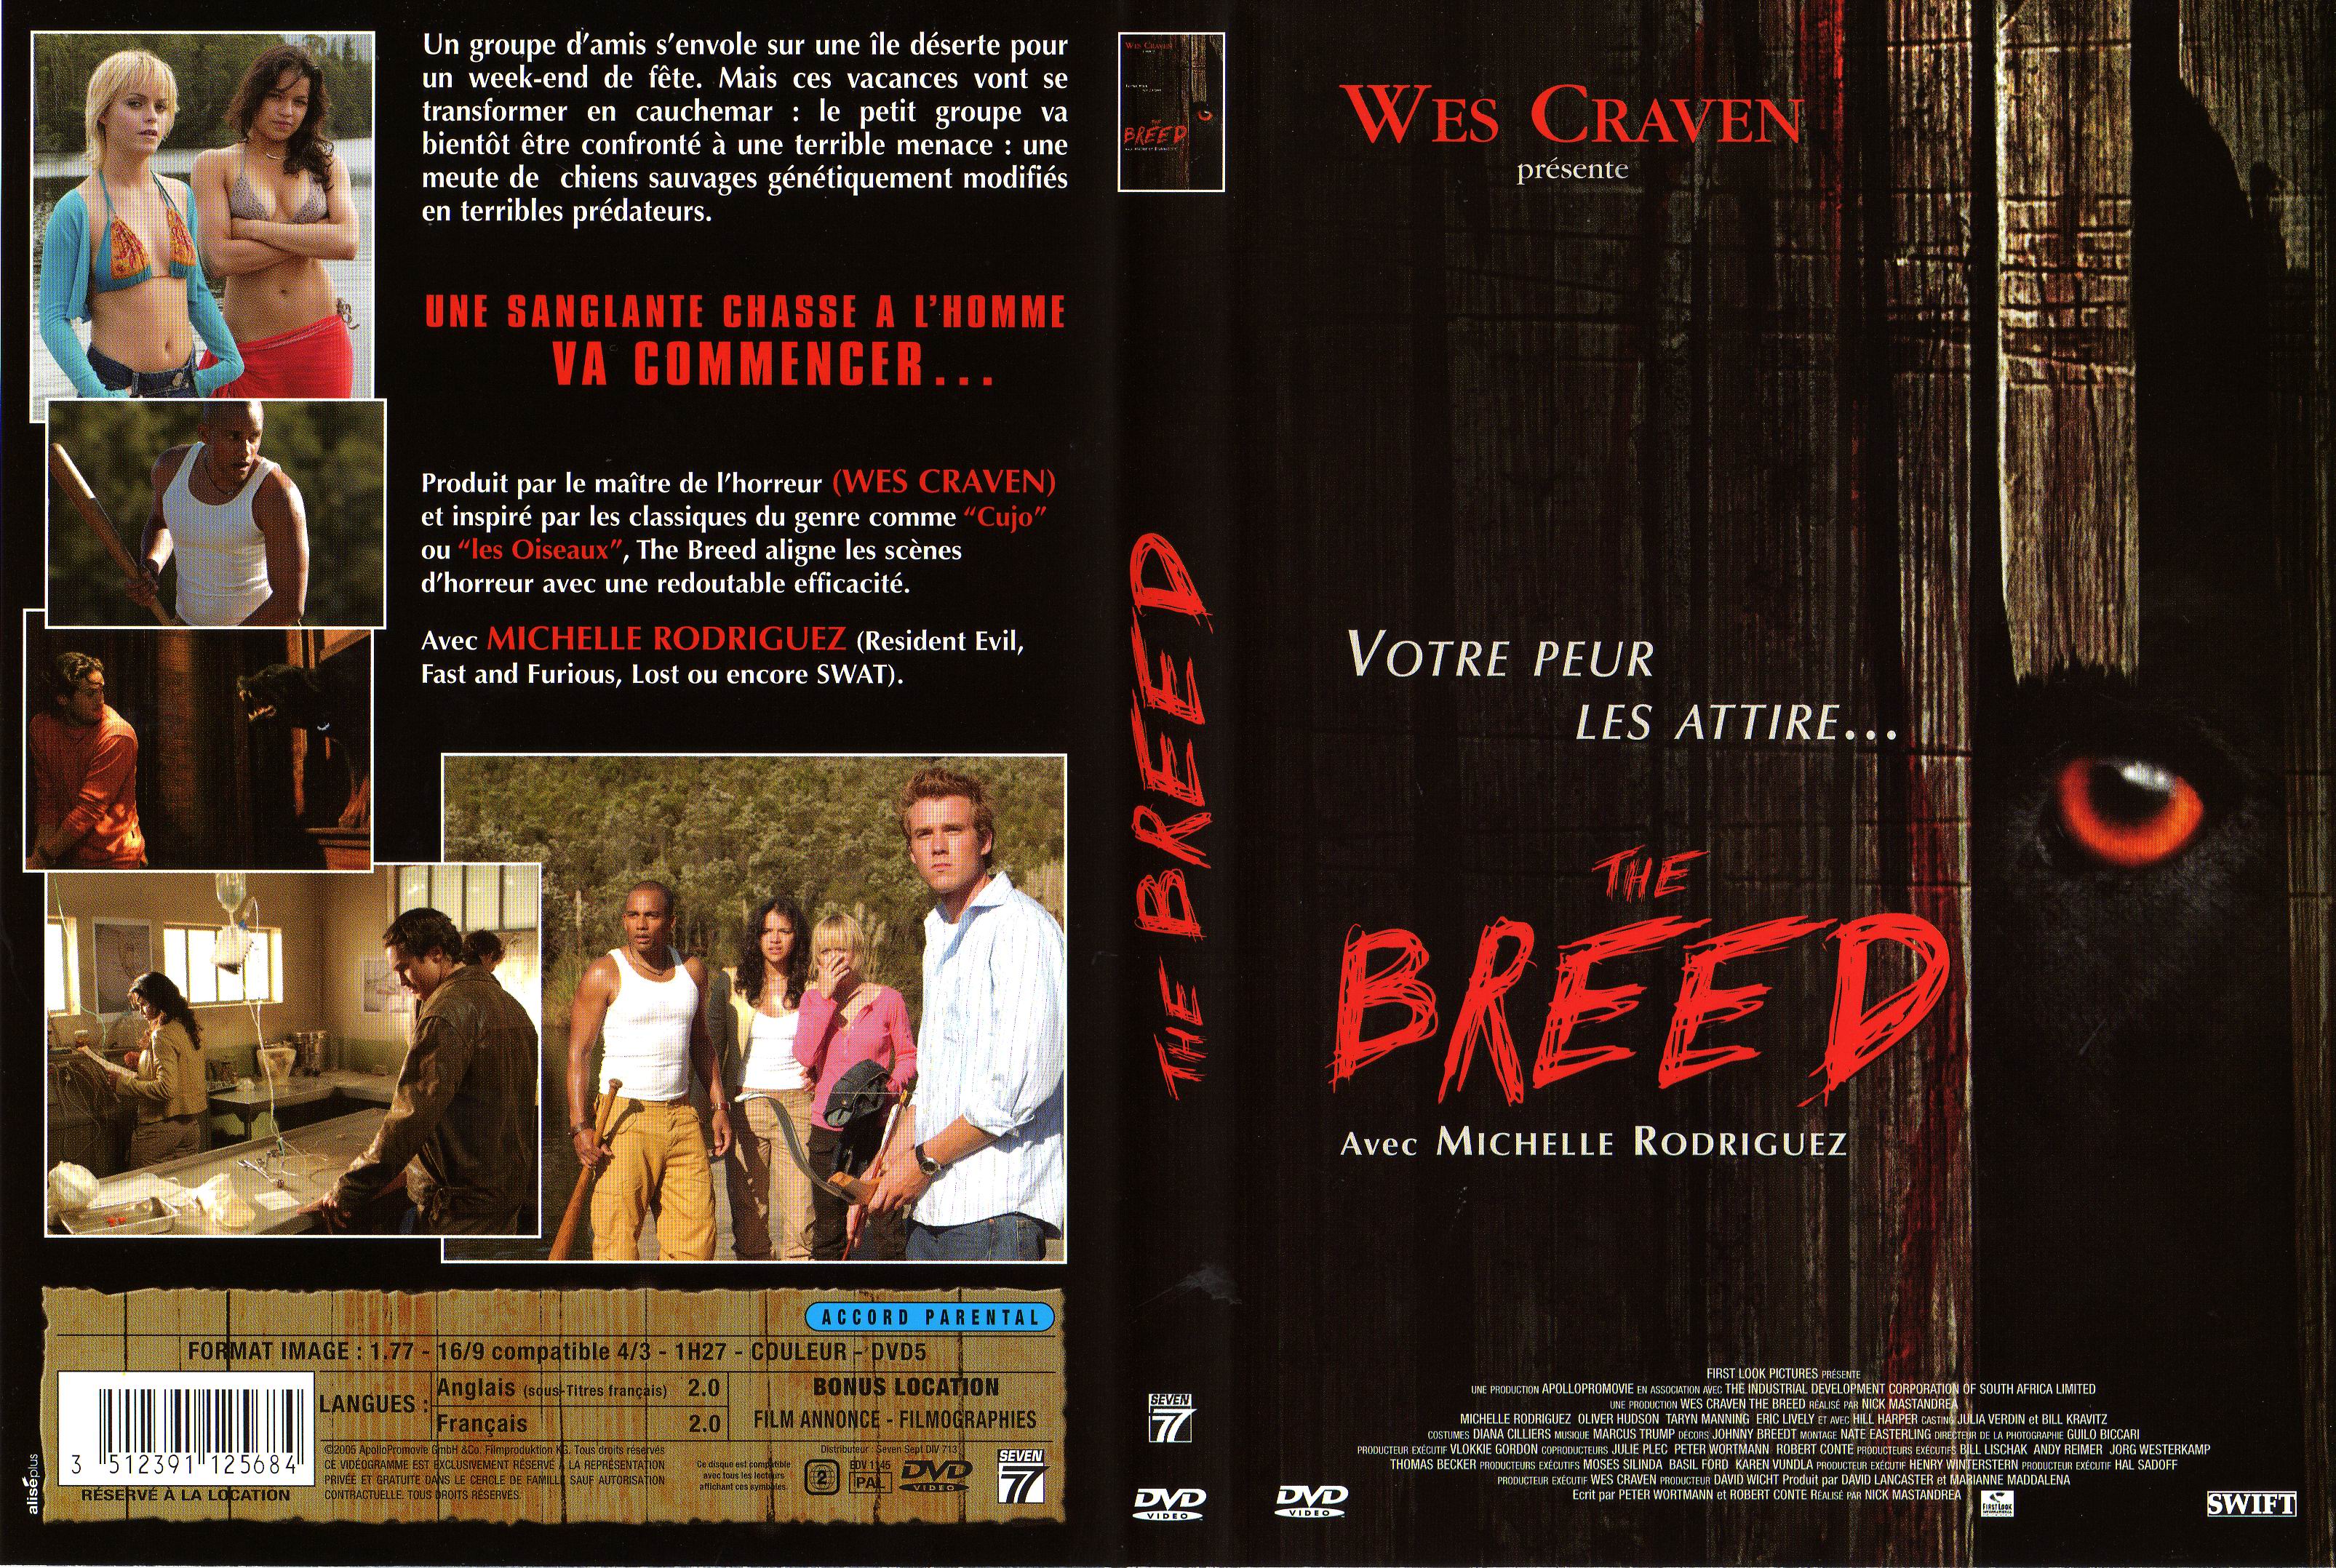 Jaquette DVD The breed (Michelle Rodriguez)